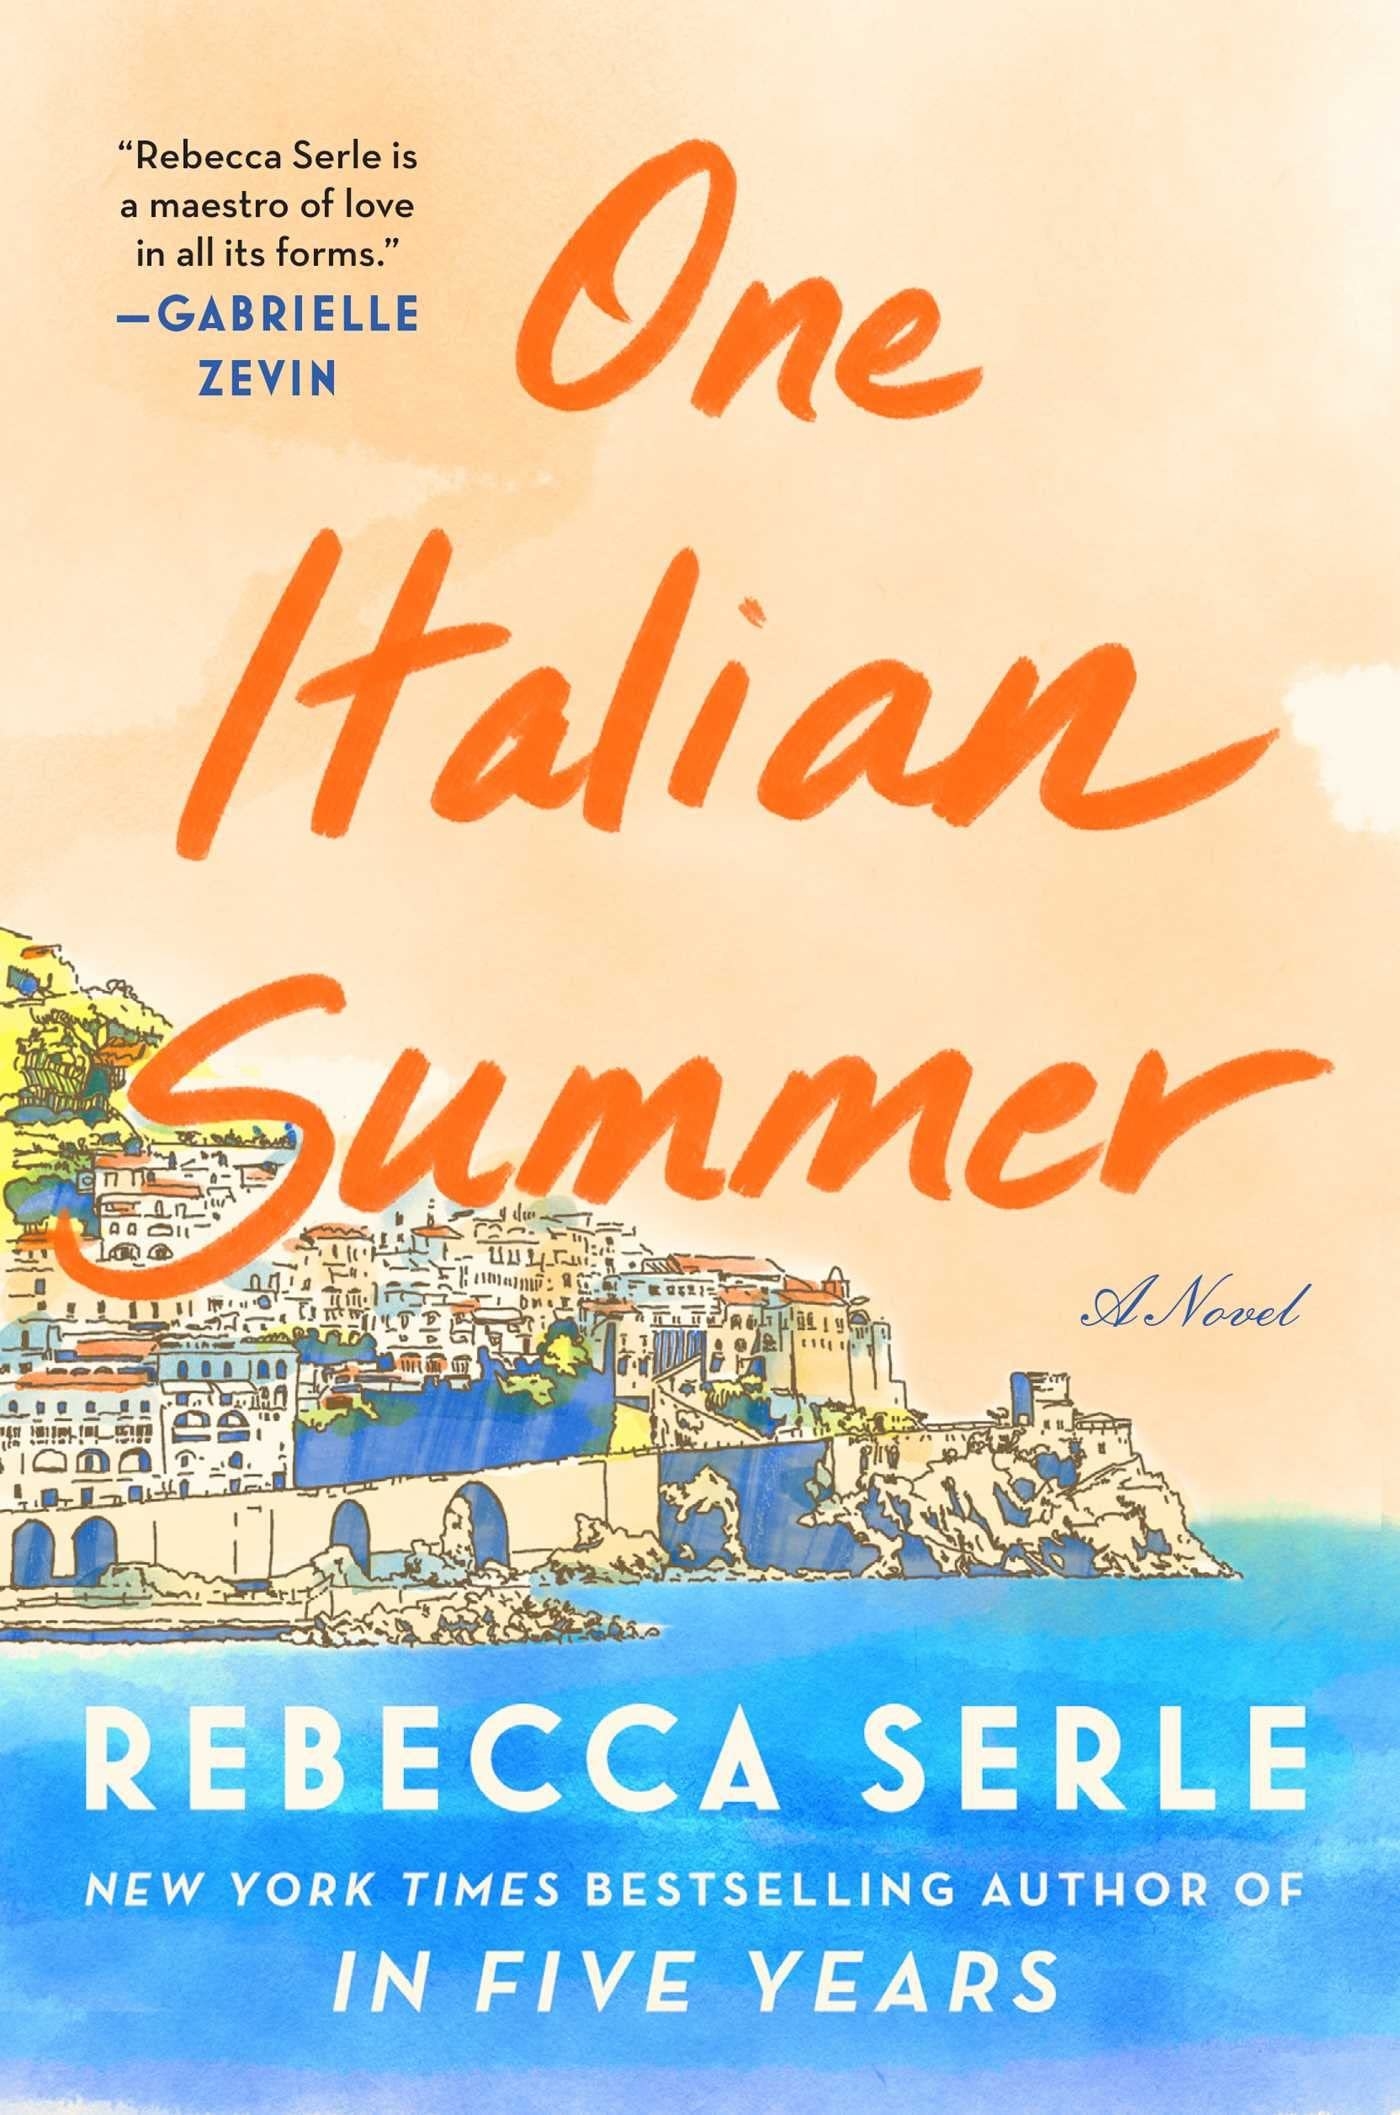 The cover of &quot;One Italian Summer&quot; by Rebecca Serle